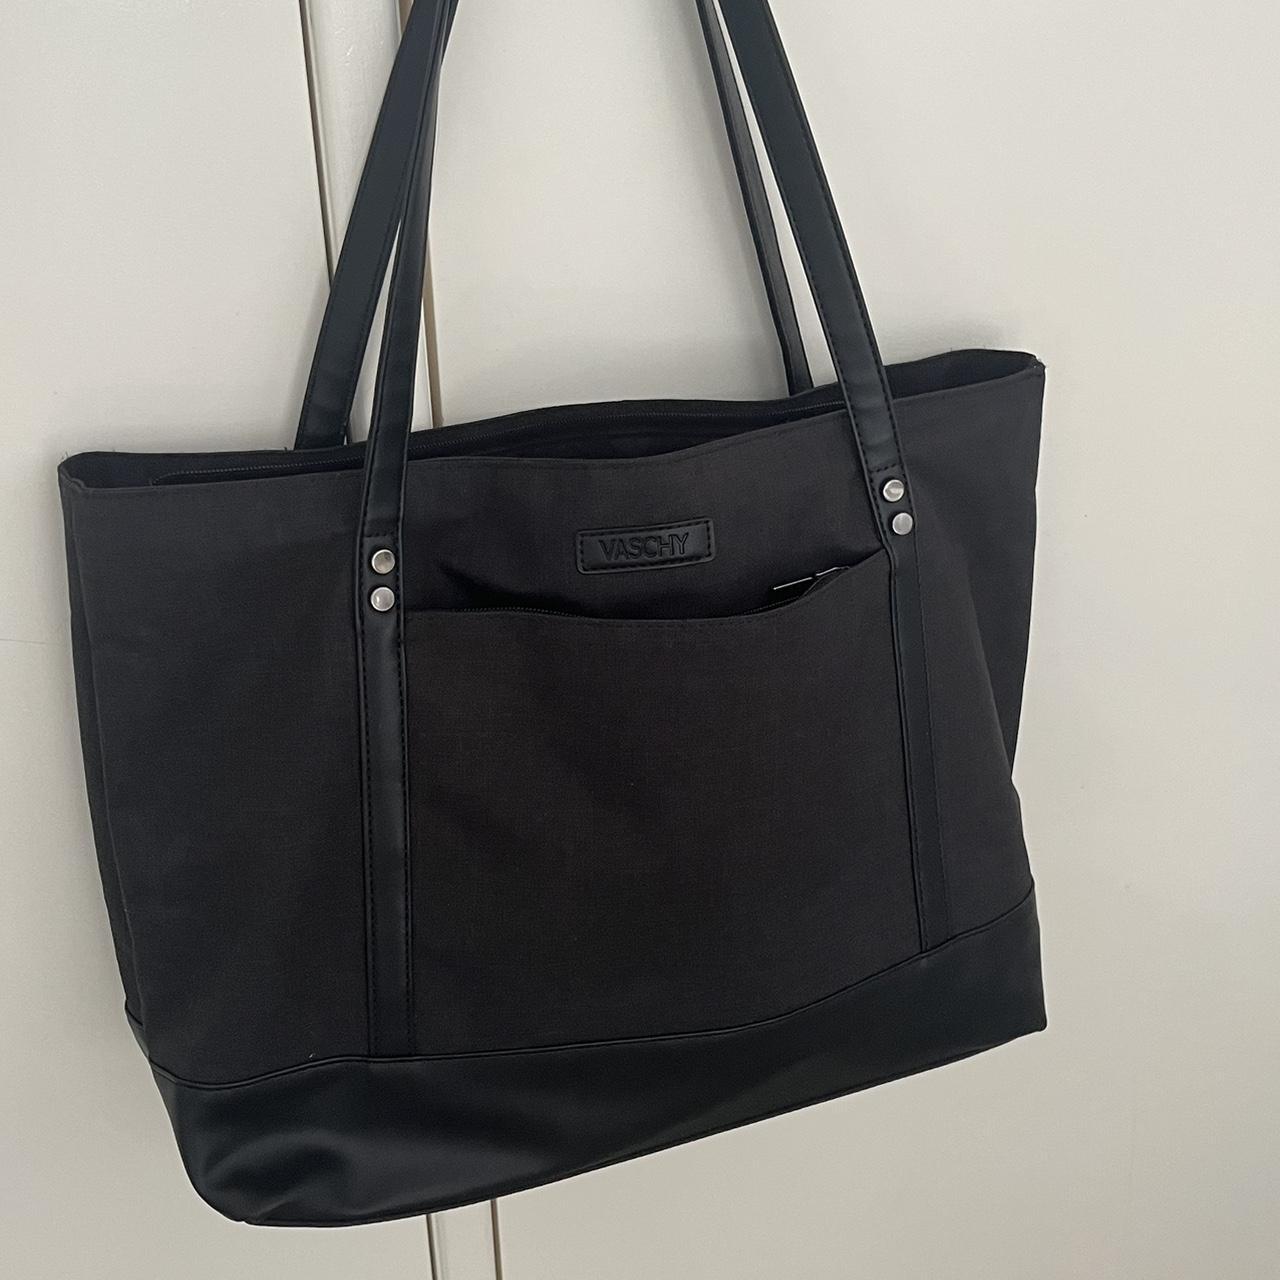 Black tote bag with laptop compartment and other... - Depop